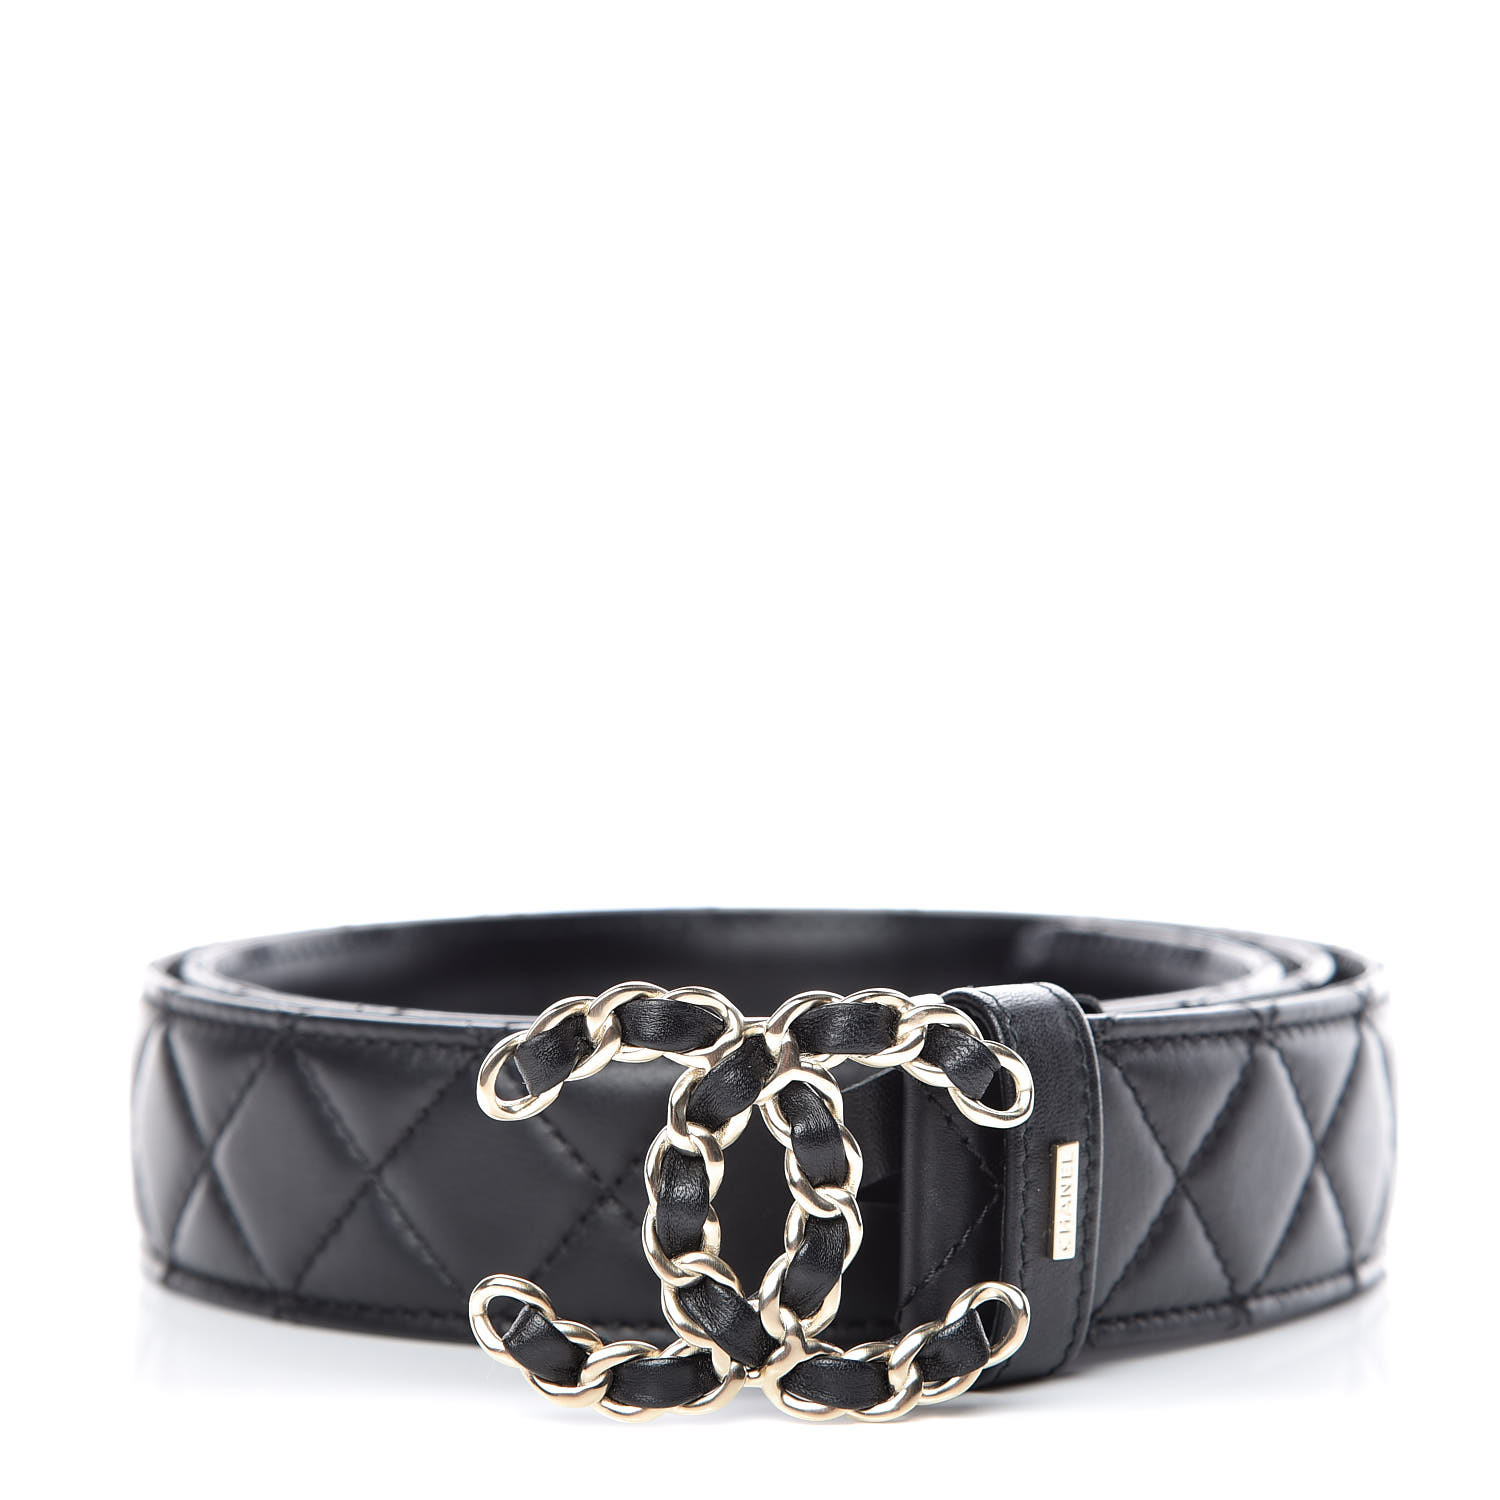 CHANEL Lambskin Quilted CC Chain Belt 90 36 Black 396423